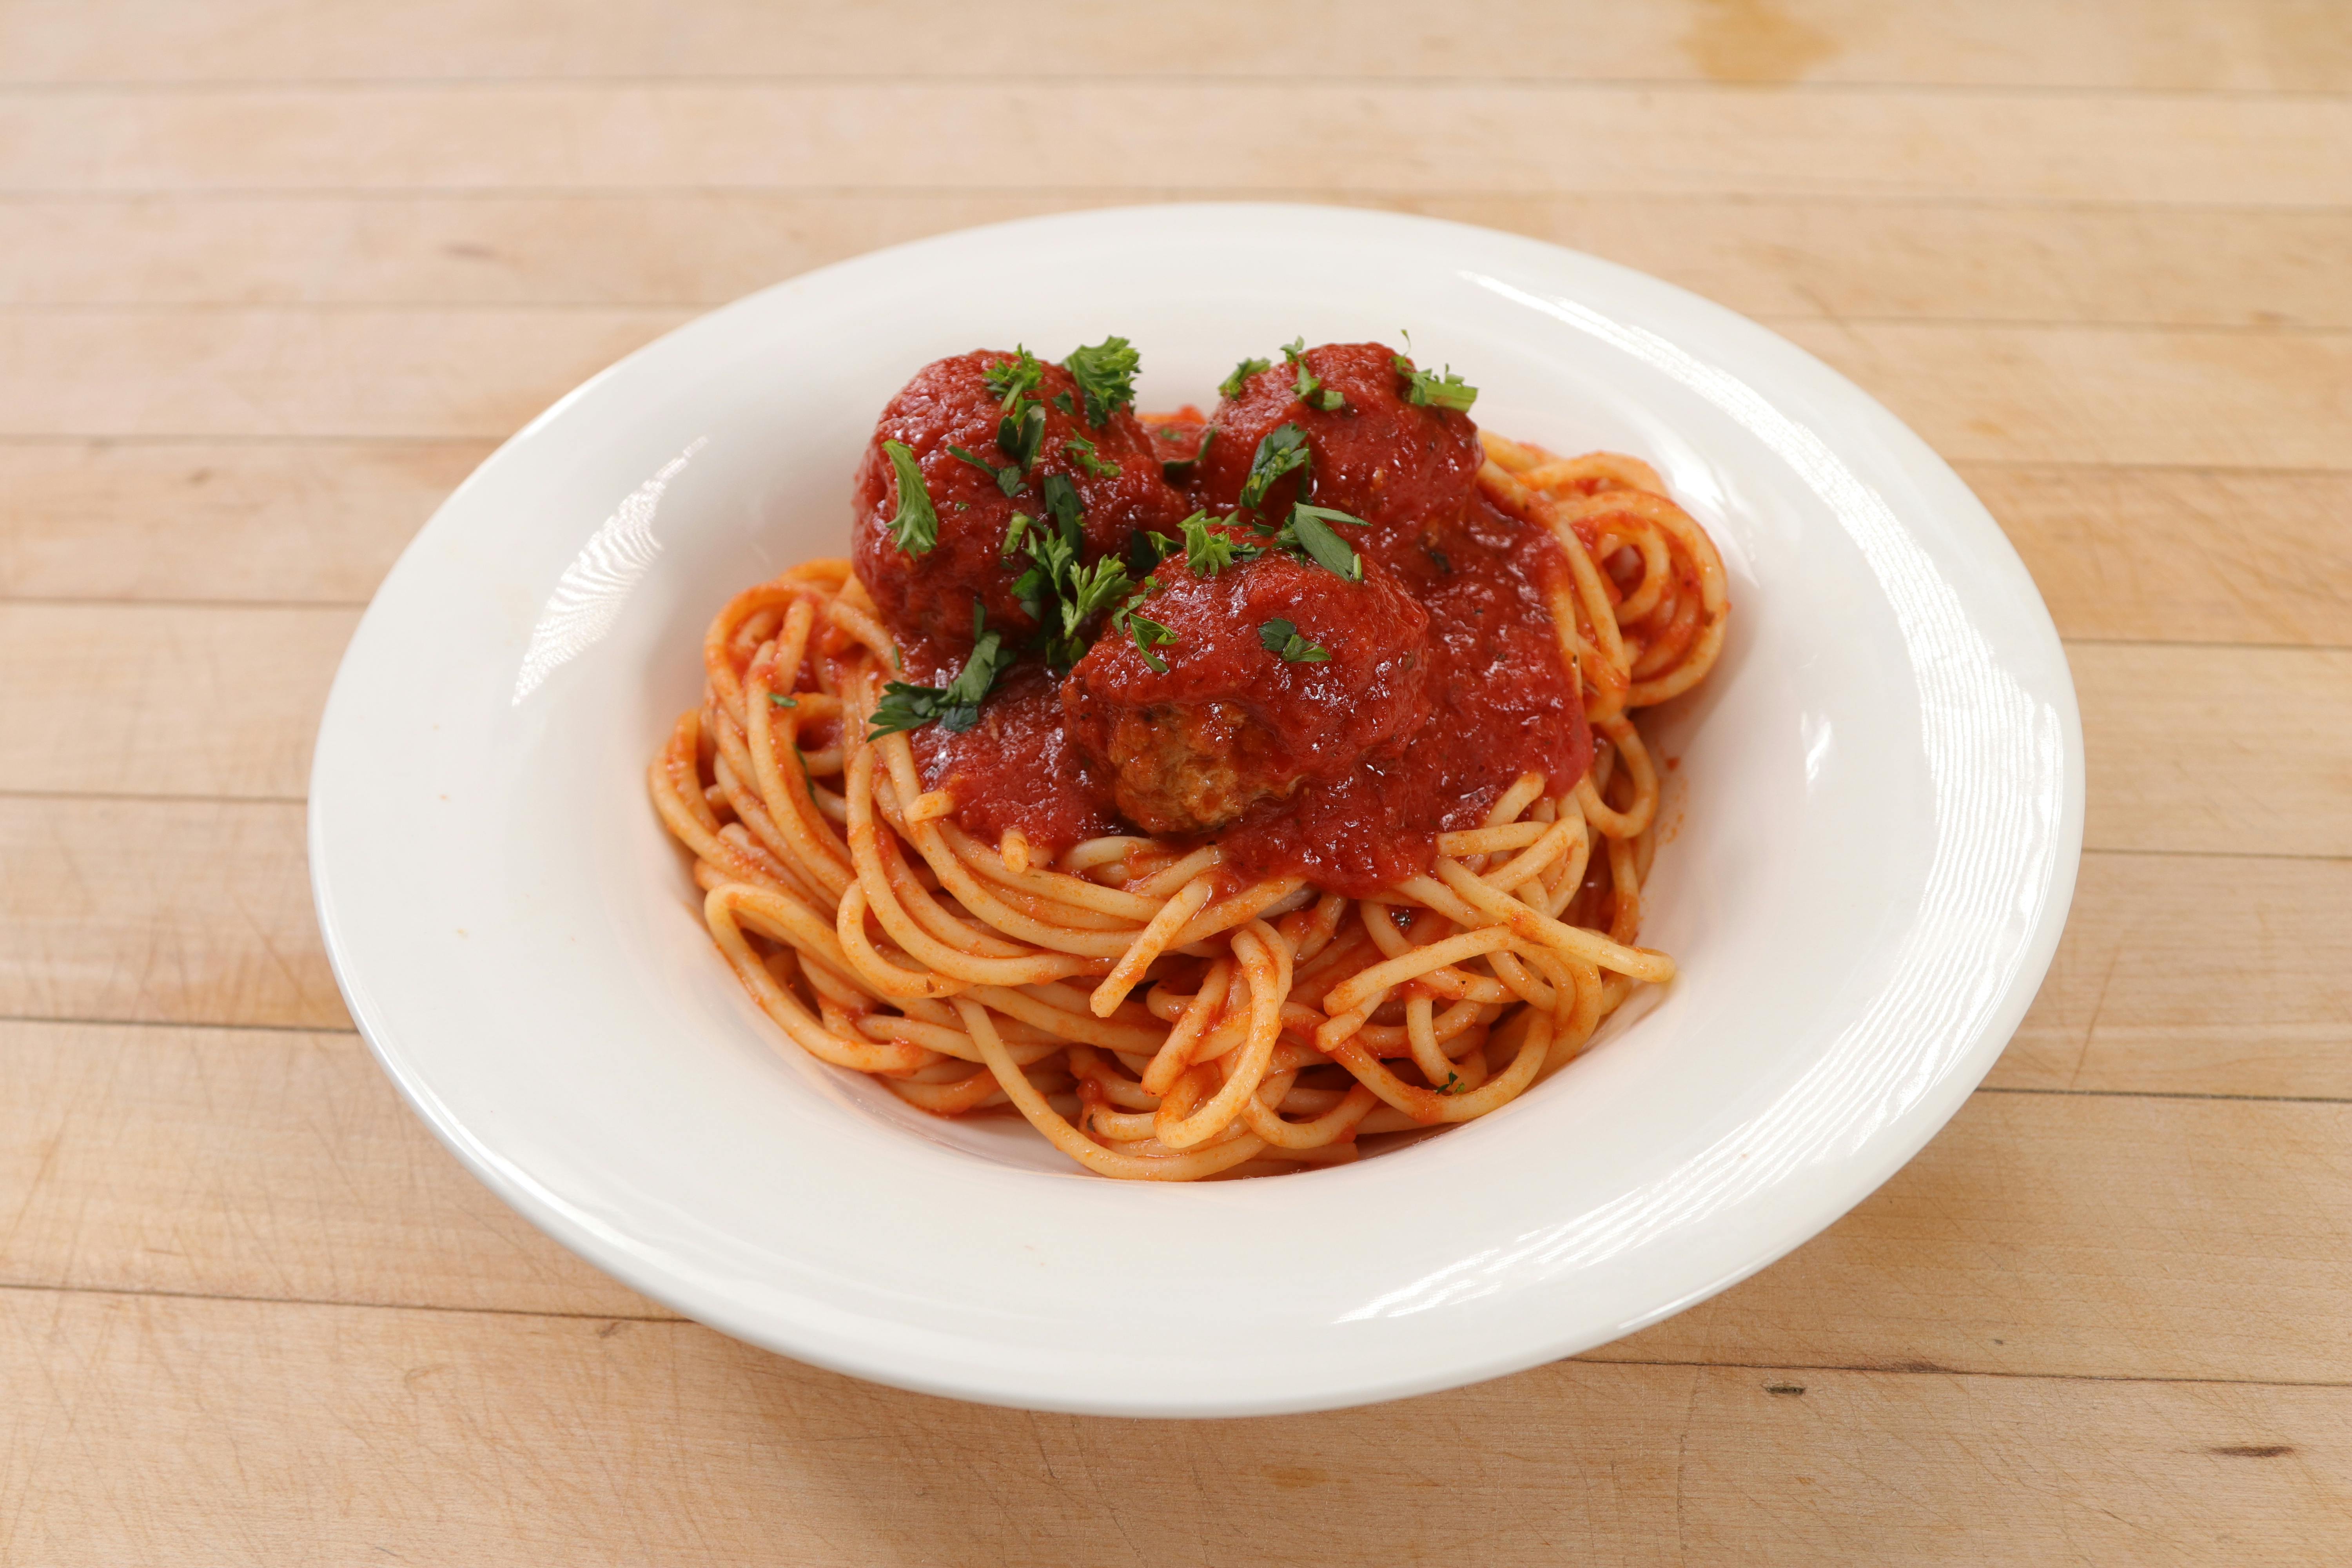 Spaghetti with Meatballs or Sausage (Lunch) from Ameci Pizza & Pasta - Lake Forest in Lake Forest, CA